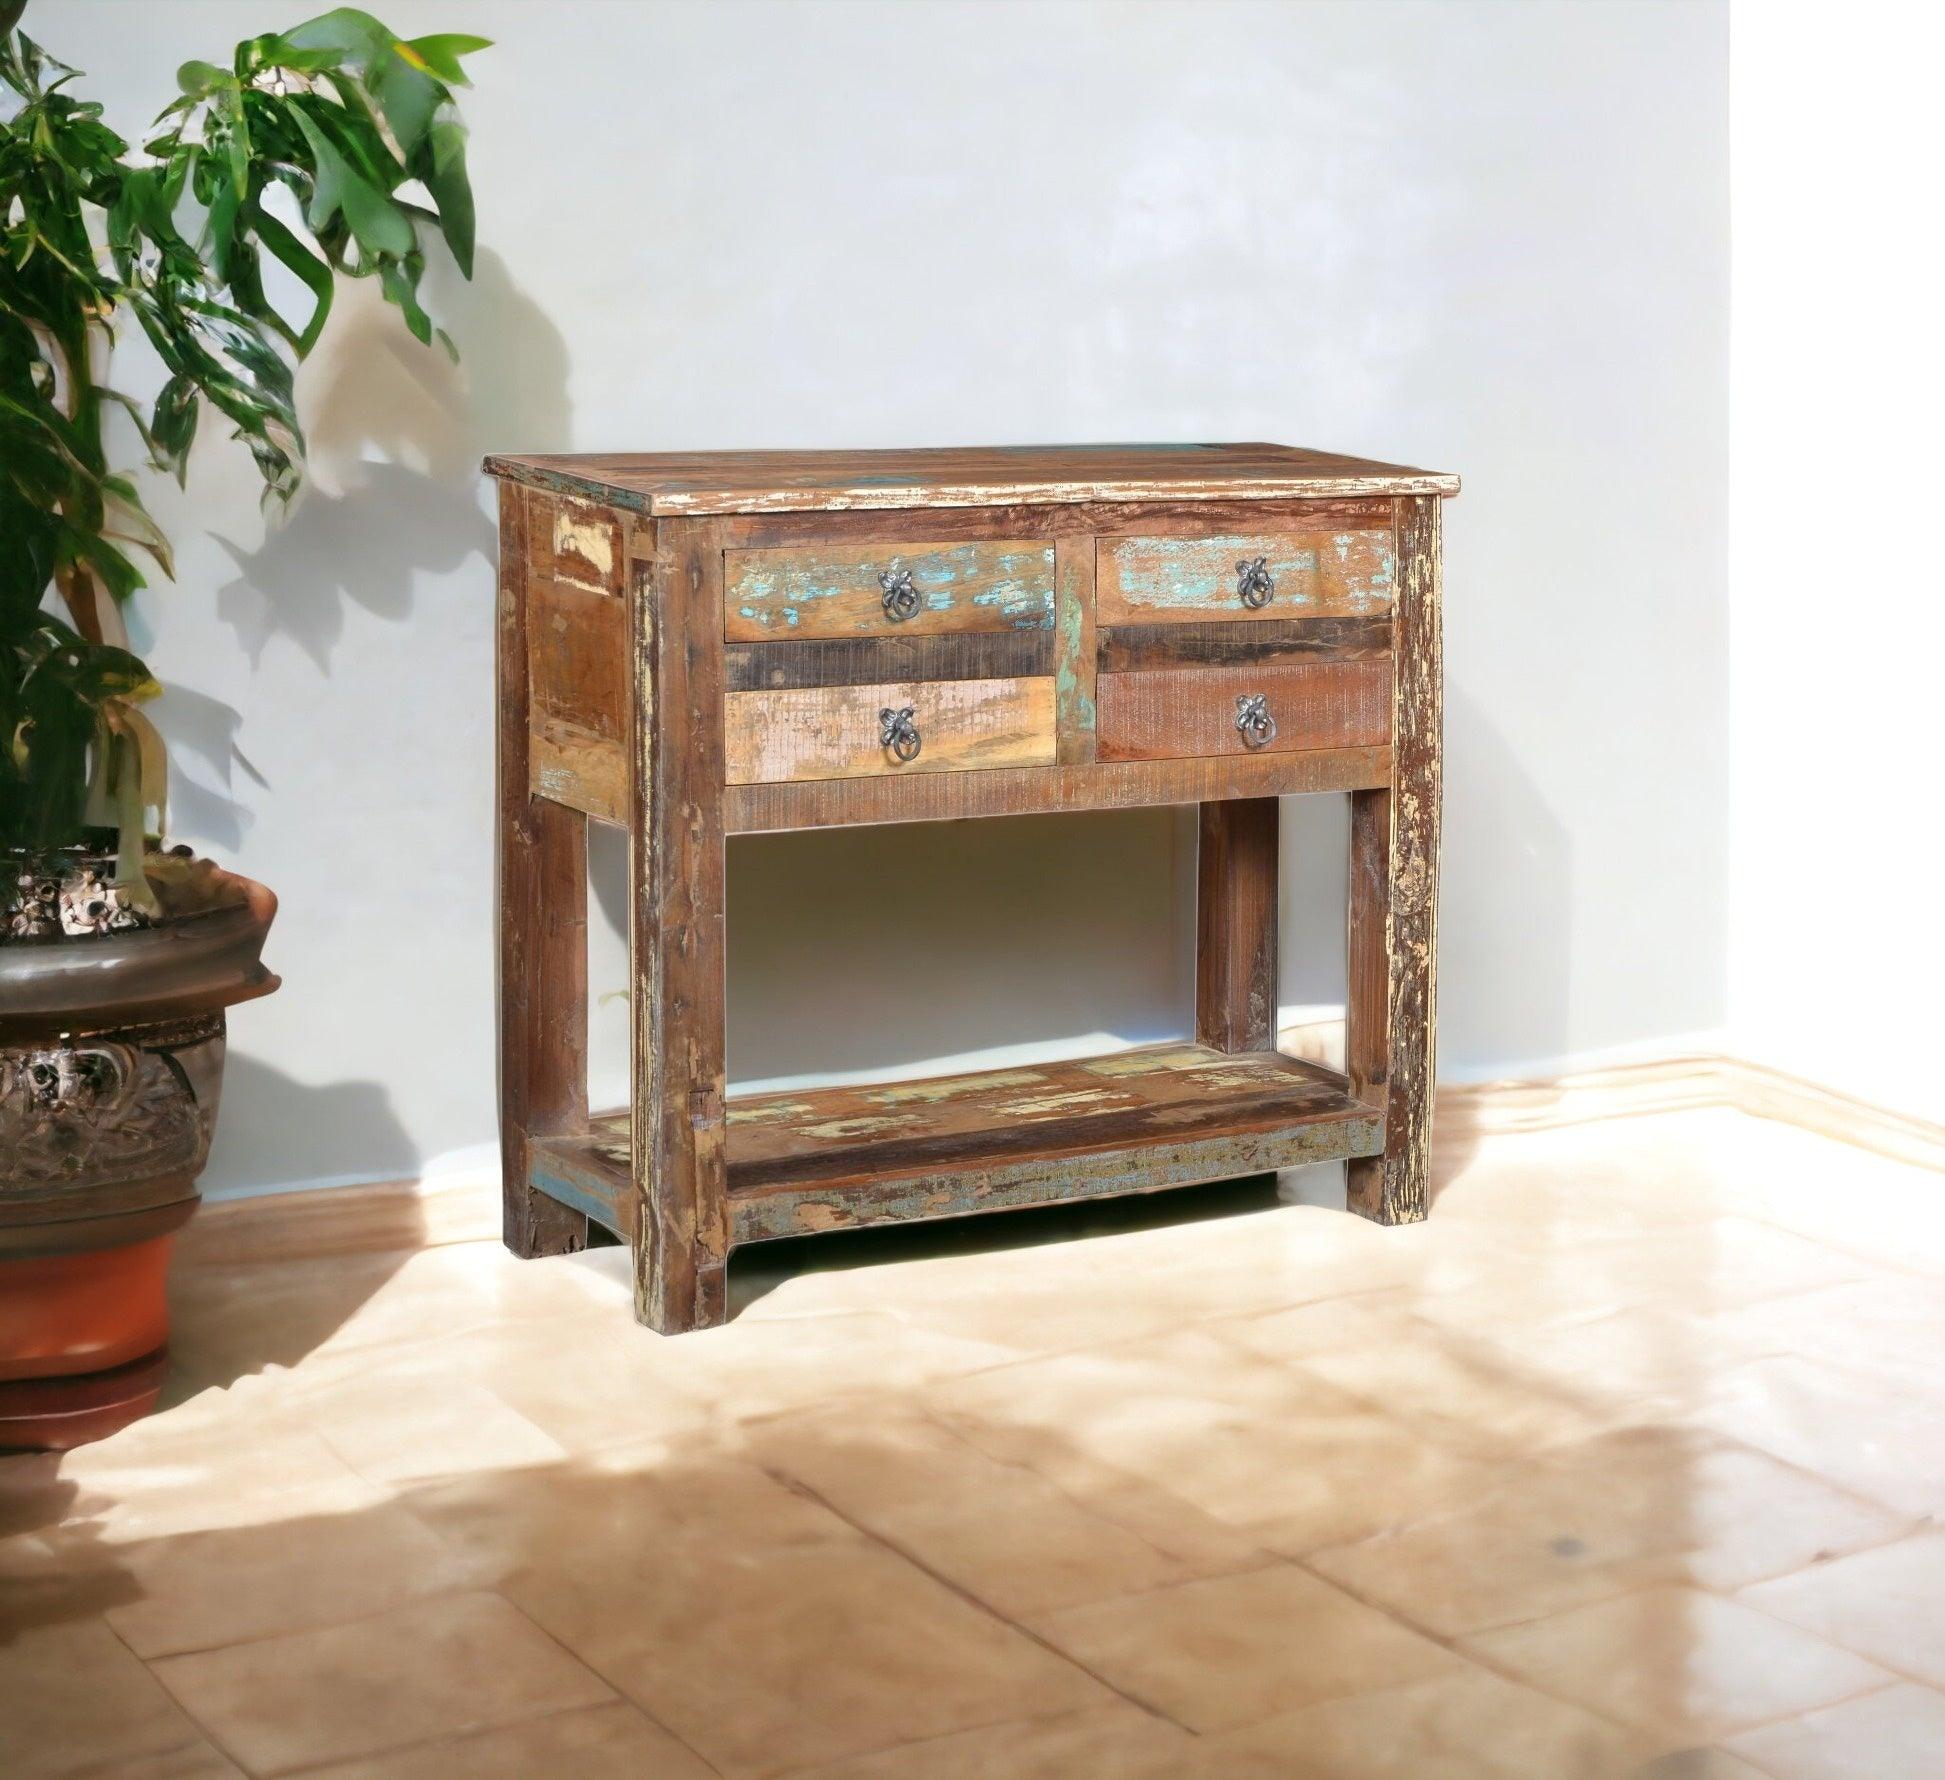 42" Brown Solid Wood Distressed Floor Shelf Console Table With Shelves And Drawers - FurniFindUSA